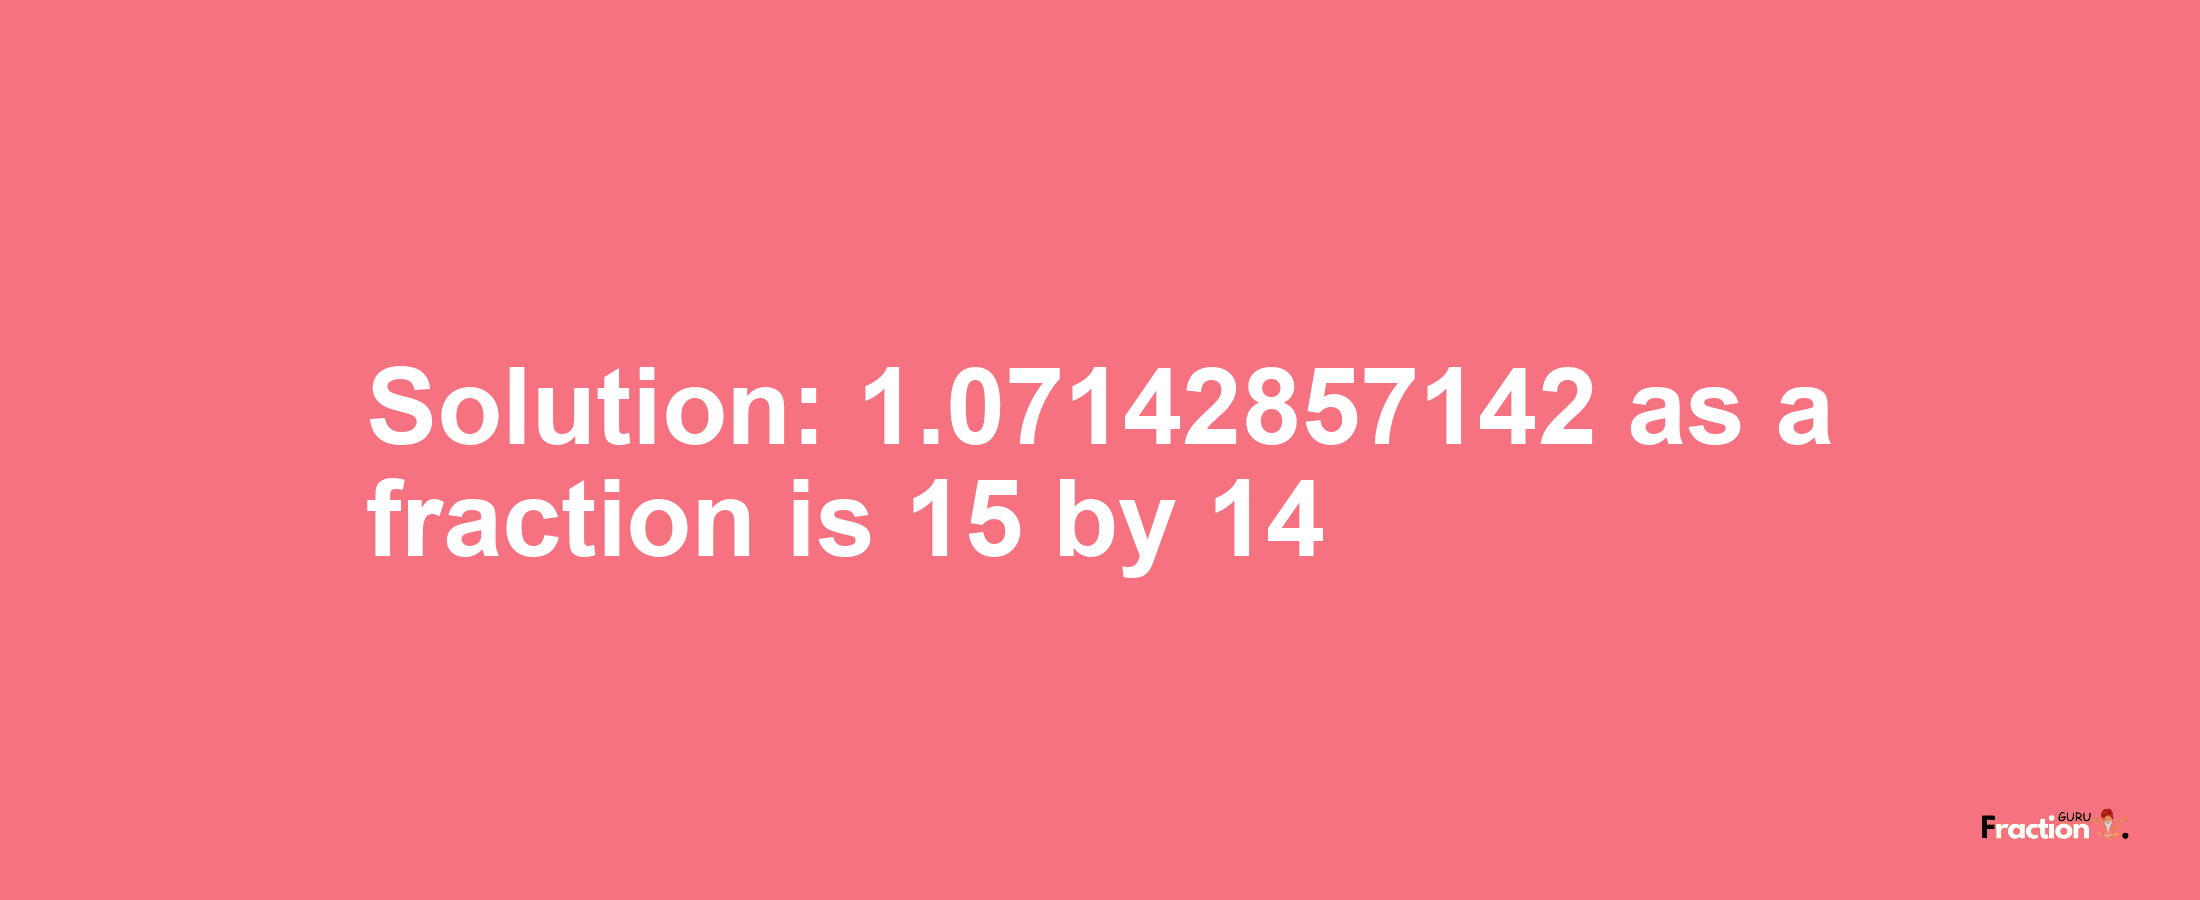 Solution:1.07142857142 as a fraction is 15/14